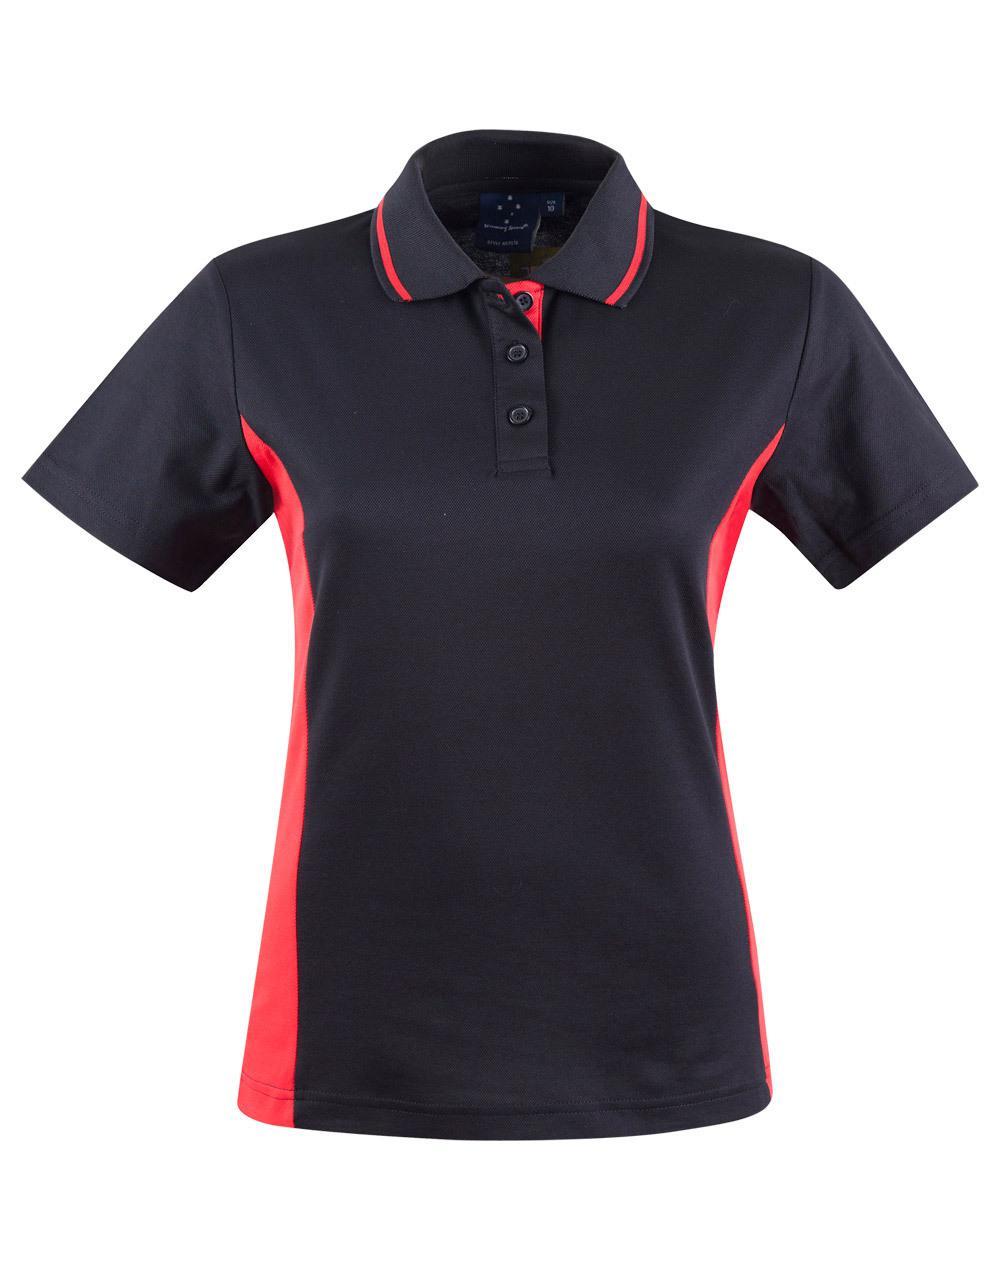 PS74 Sz 08 TEAMMATE Cotton Polyester Ladies Polo Shirt Black/Red